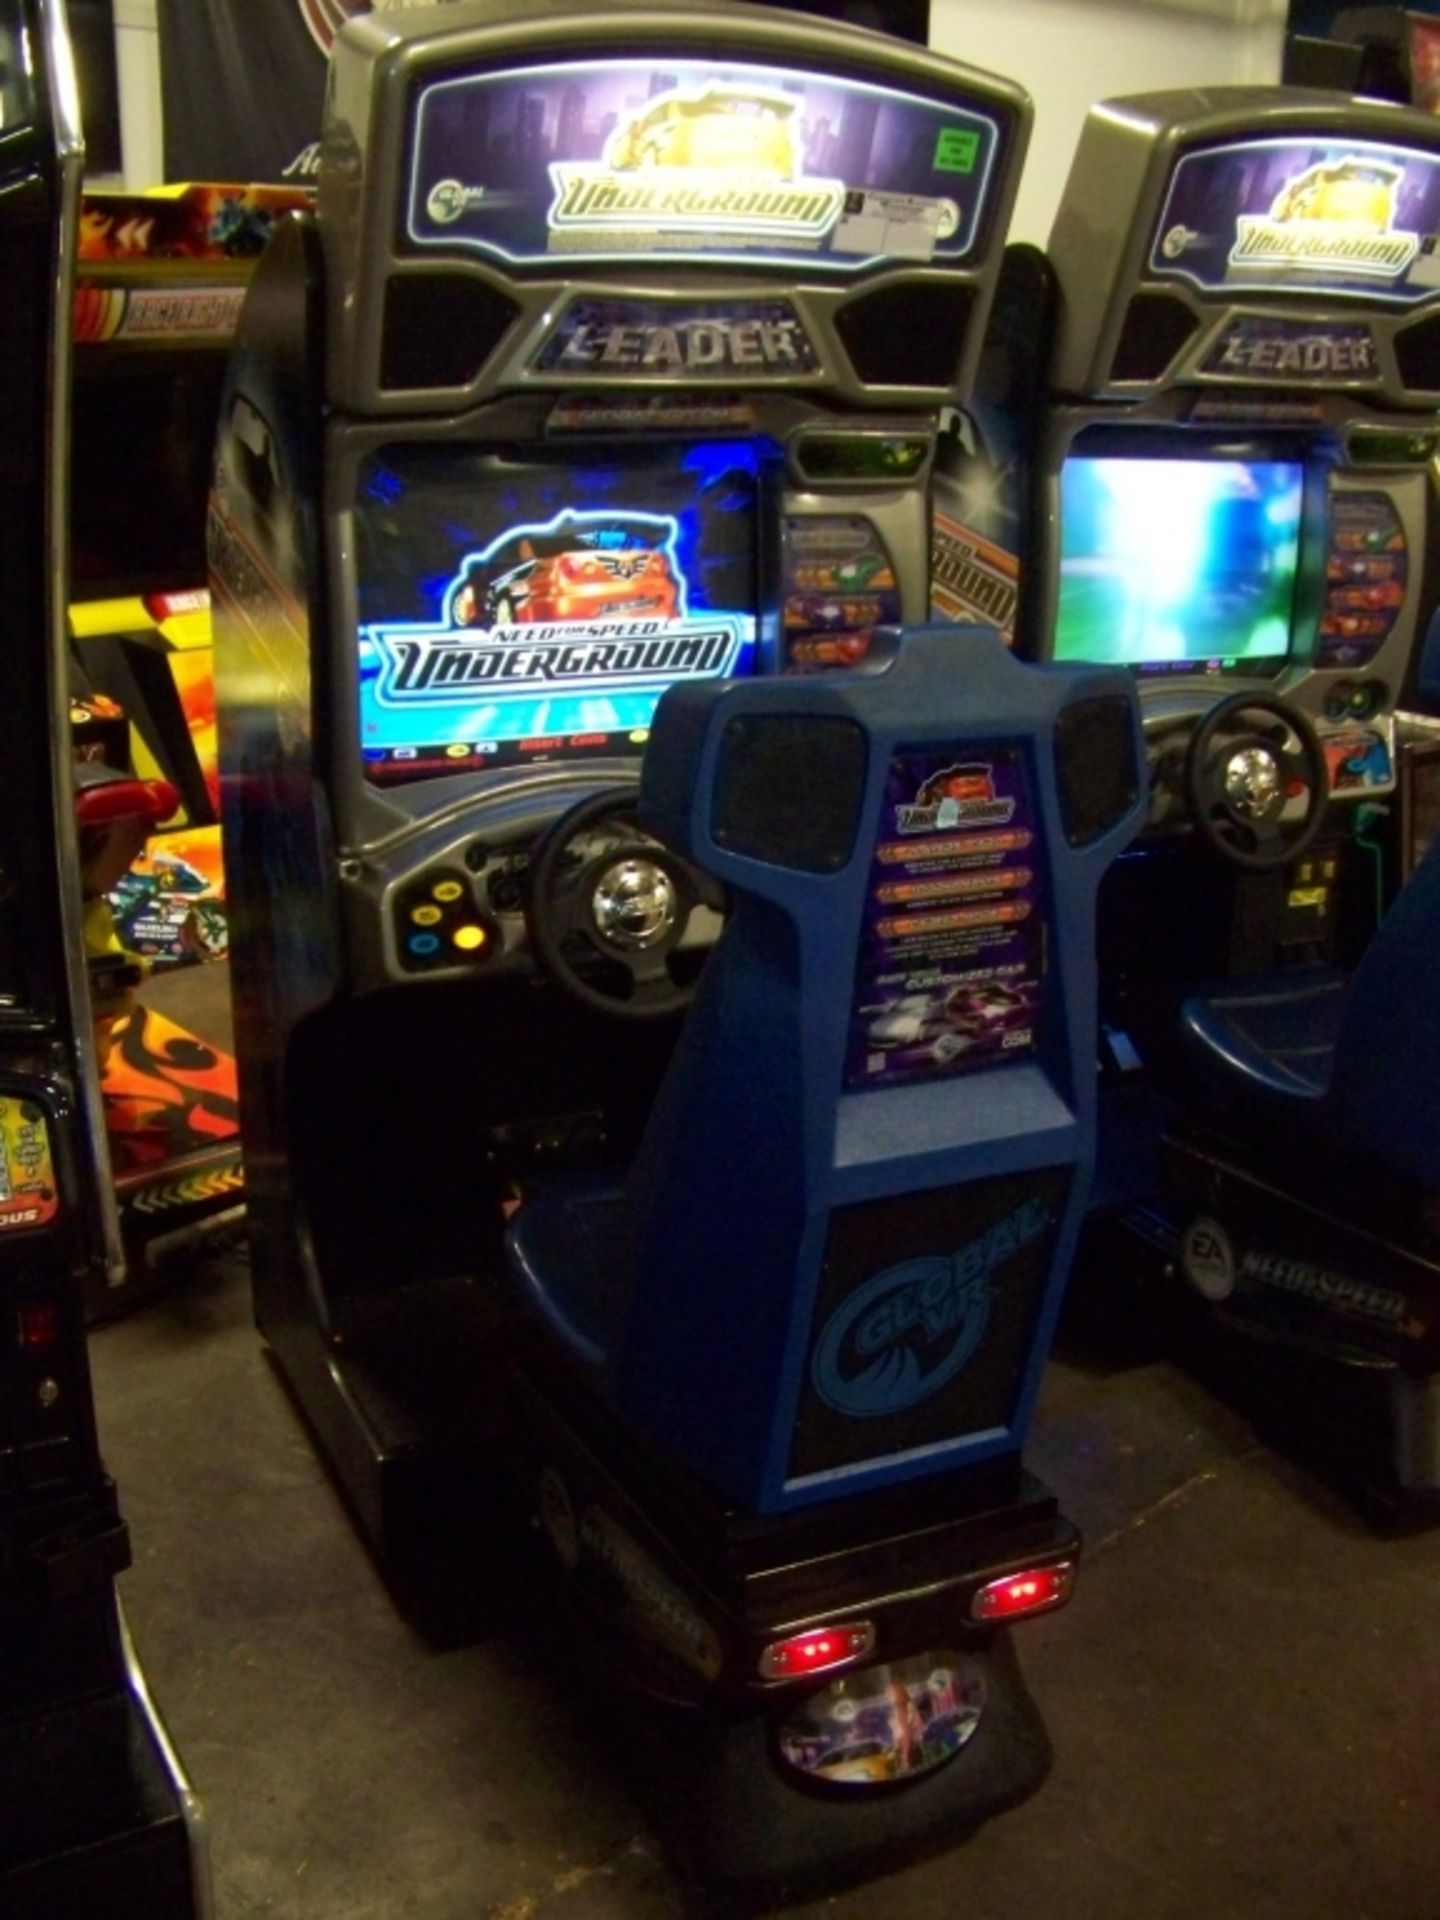 NEED FOR SPEED UNDERGROUND RACING ARCADE GAME Item is in used condition. Evidence of wear and